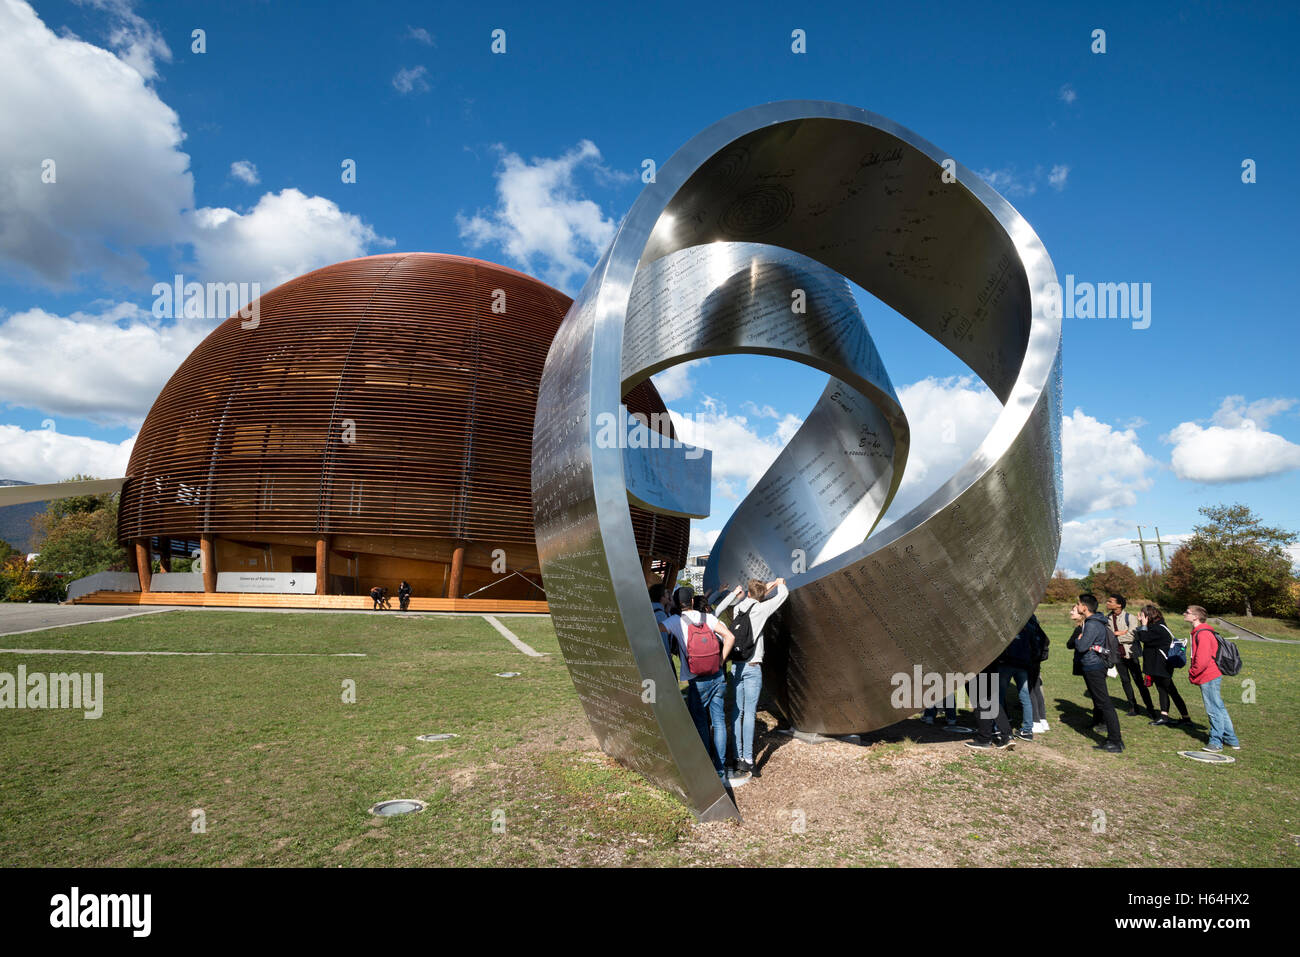 Students admiring the 'Wandering the immeasurable' sculpture CERN centre, Meyrin, Switzerland Stock Photo